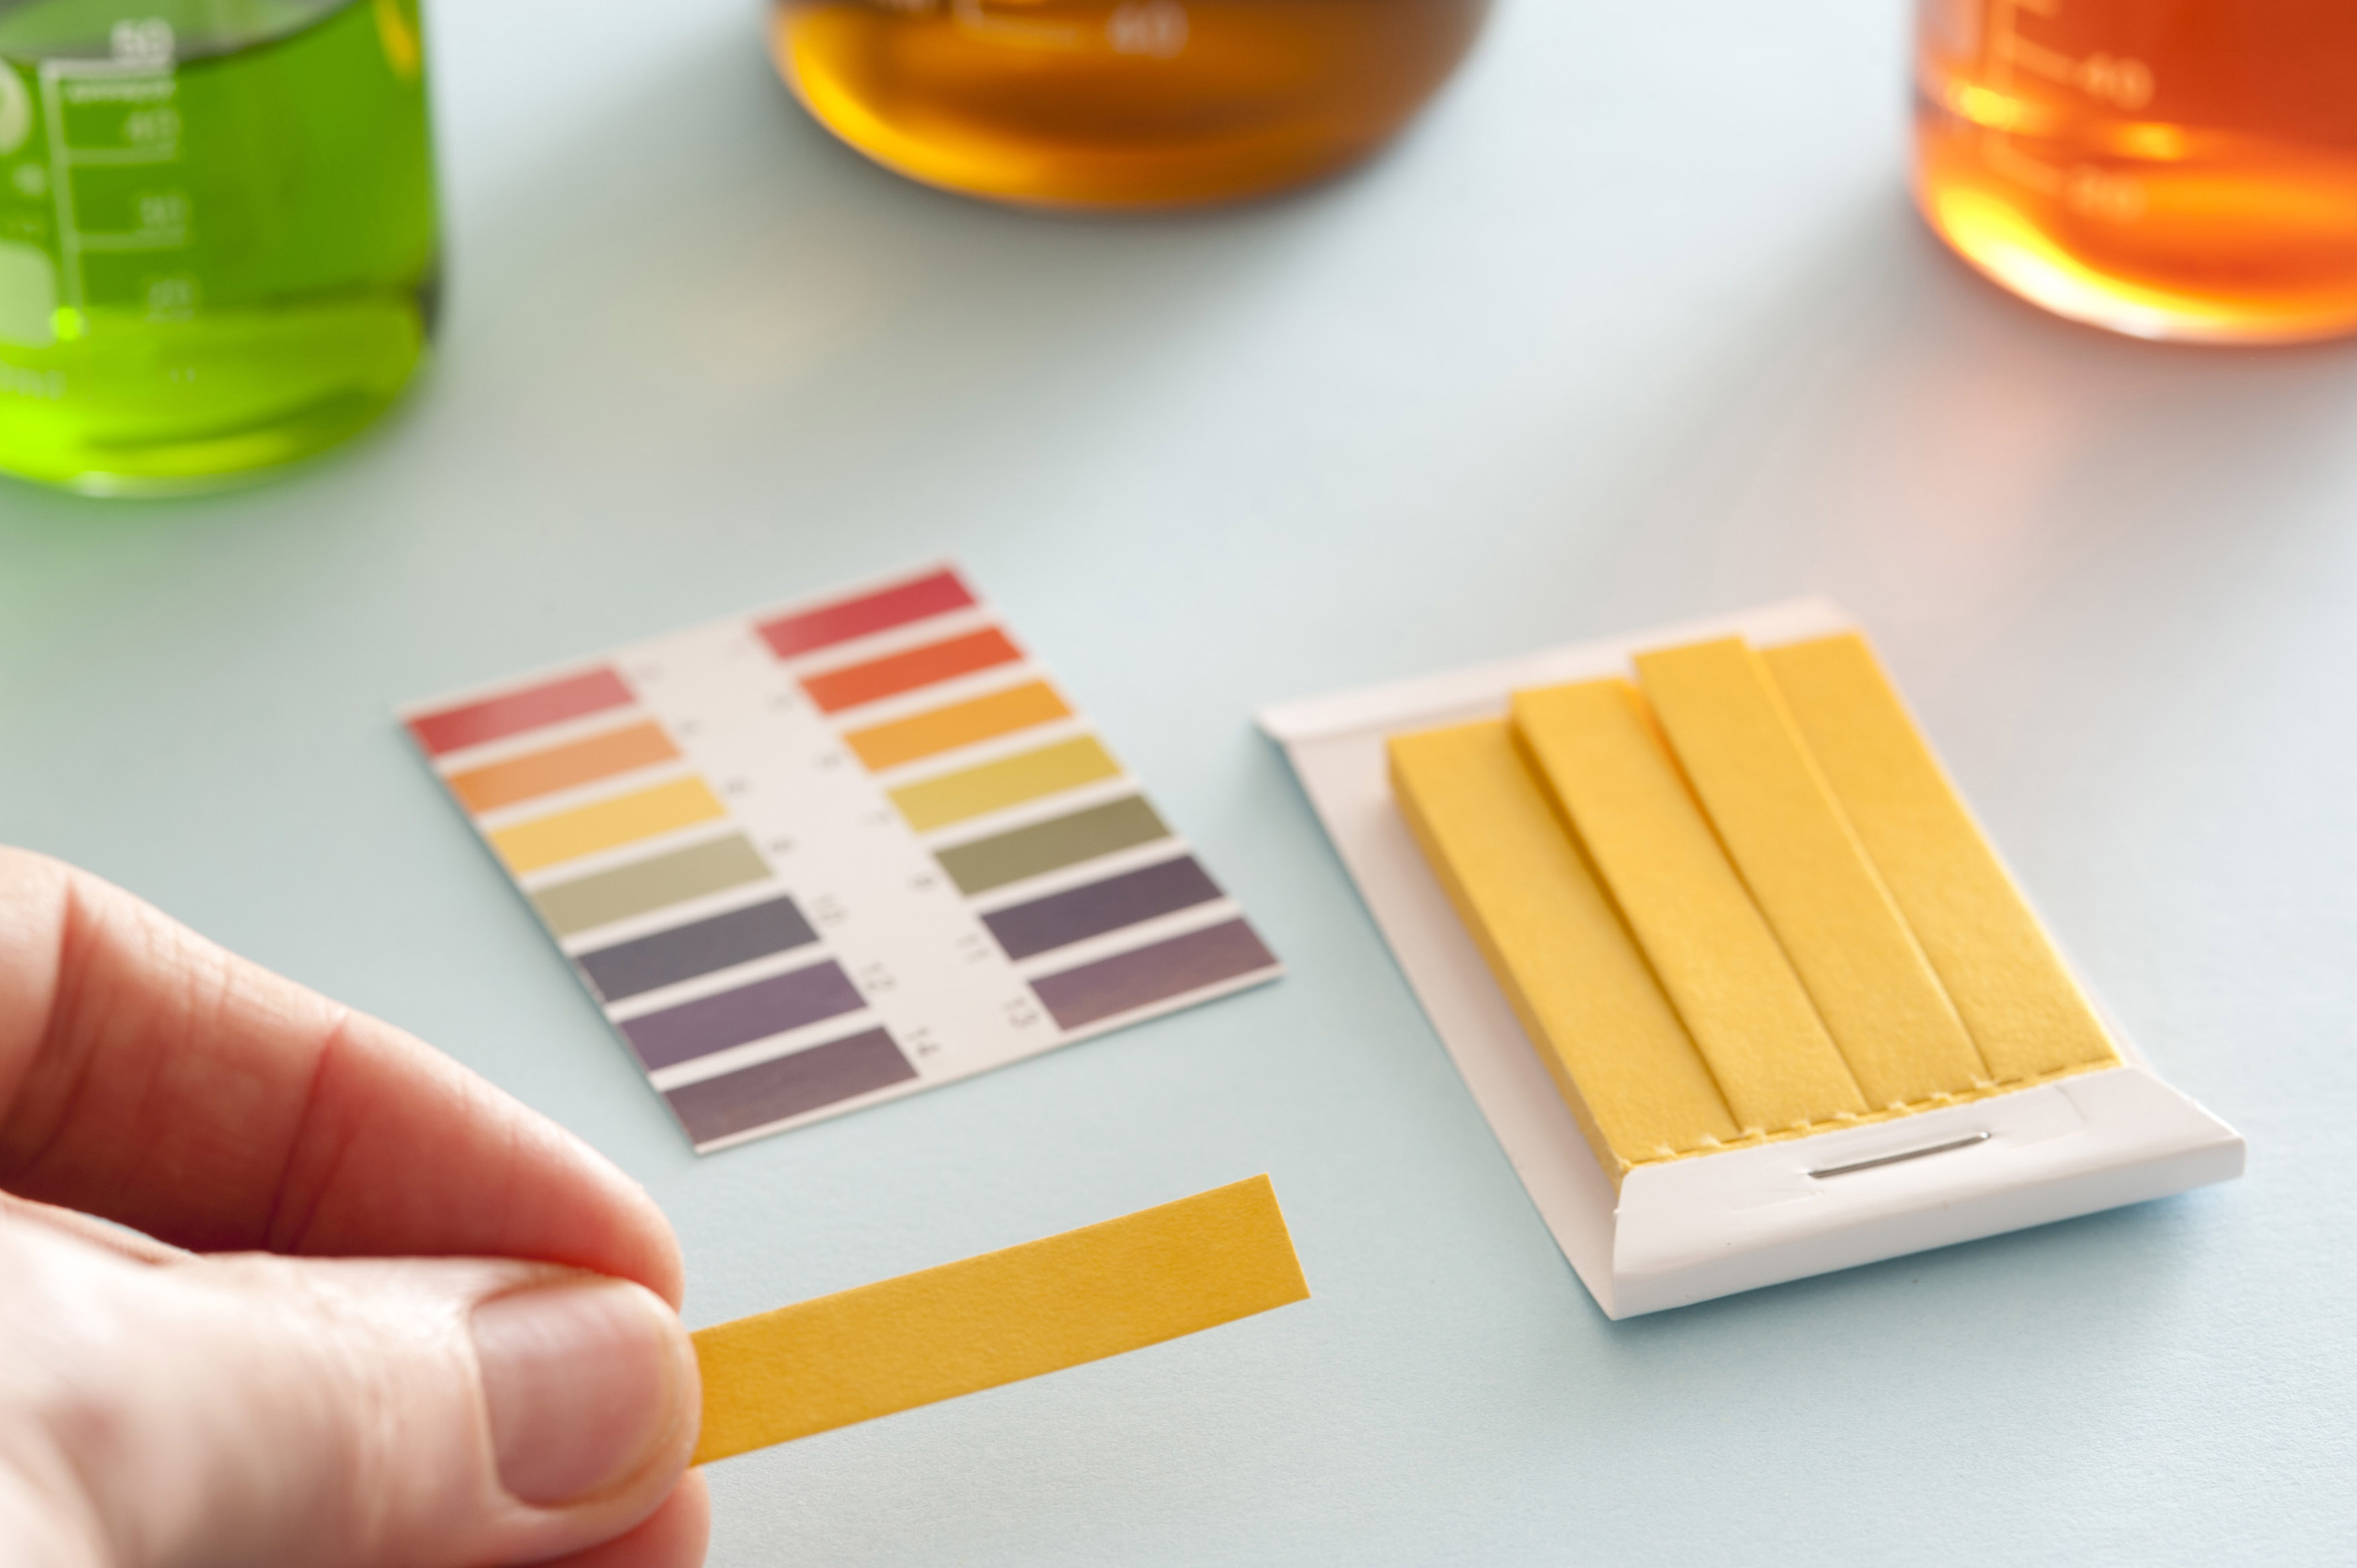 Free Stock Image Of Ph Litmus Paper Chart And Strips Images